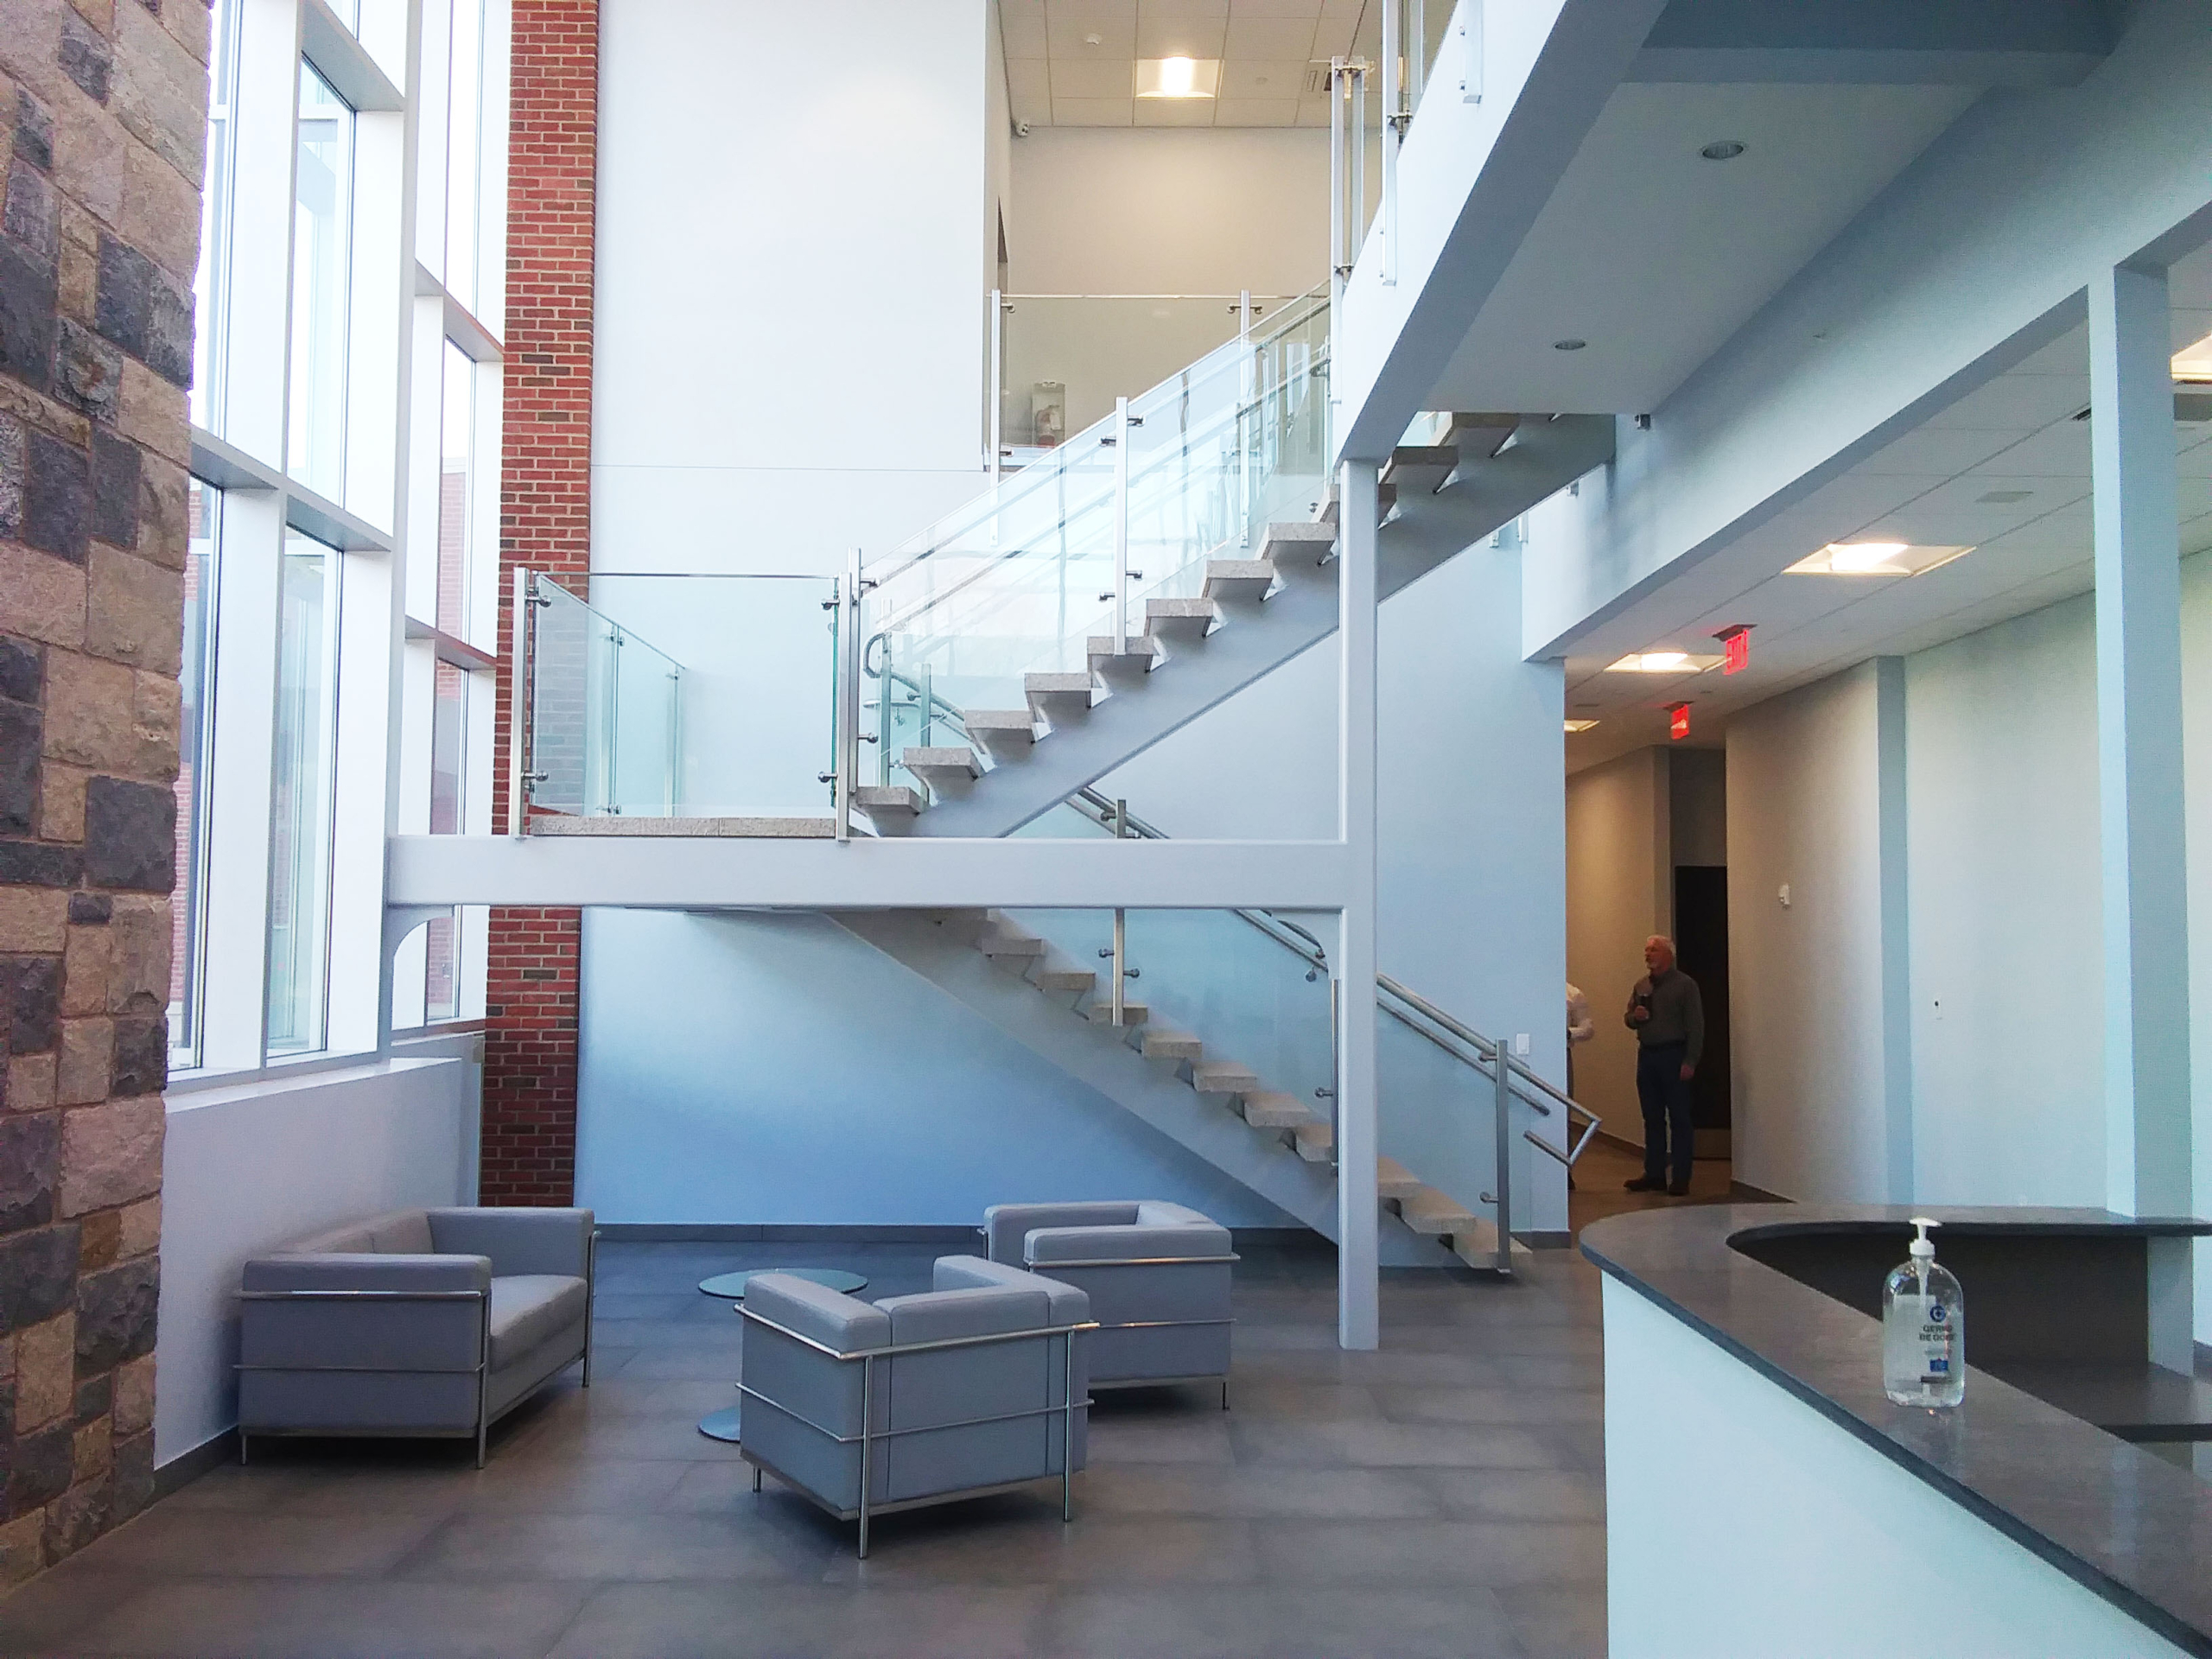 A two-story open office lobby, with white walls, a stone floor and brick trim. An open staircase with clear glass railing panels.